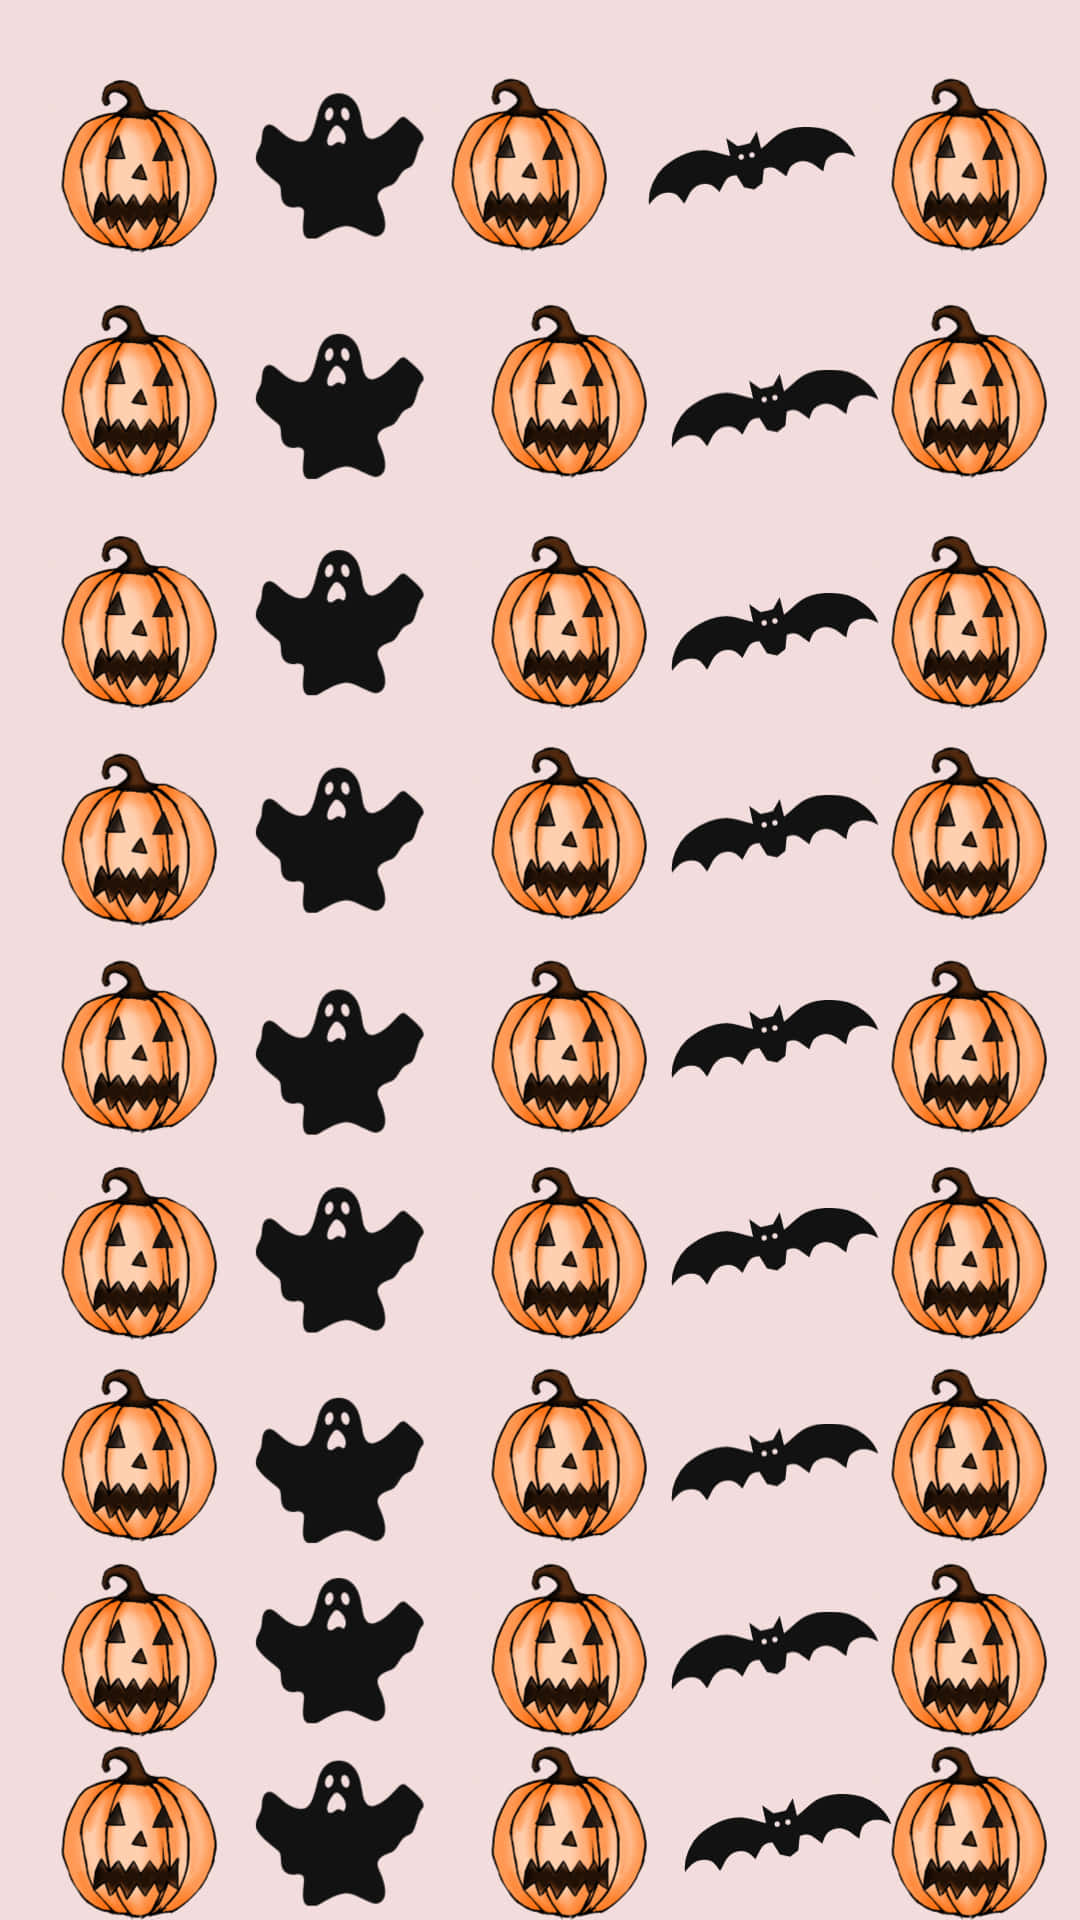 Prepare for an exciting Halloween by donning your favorite Harry Potter apparel! Wallpaper